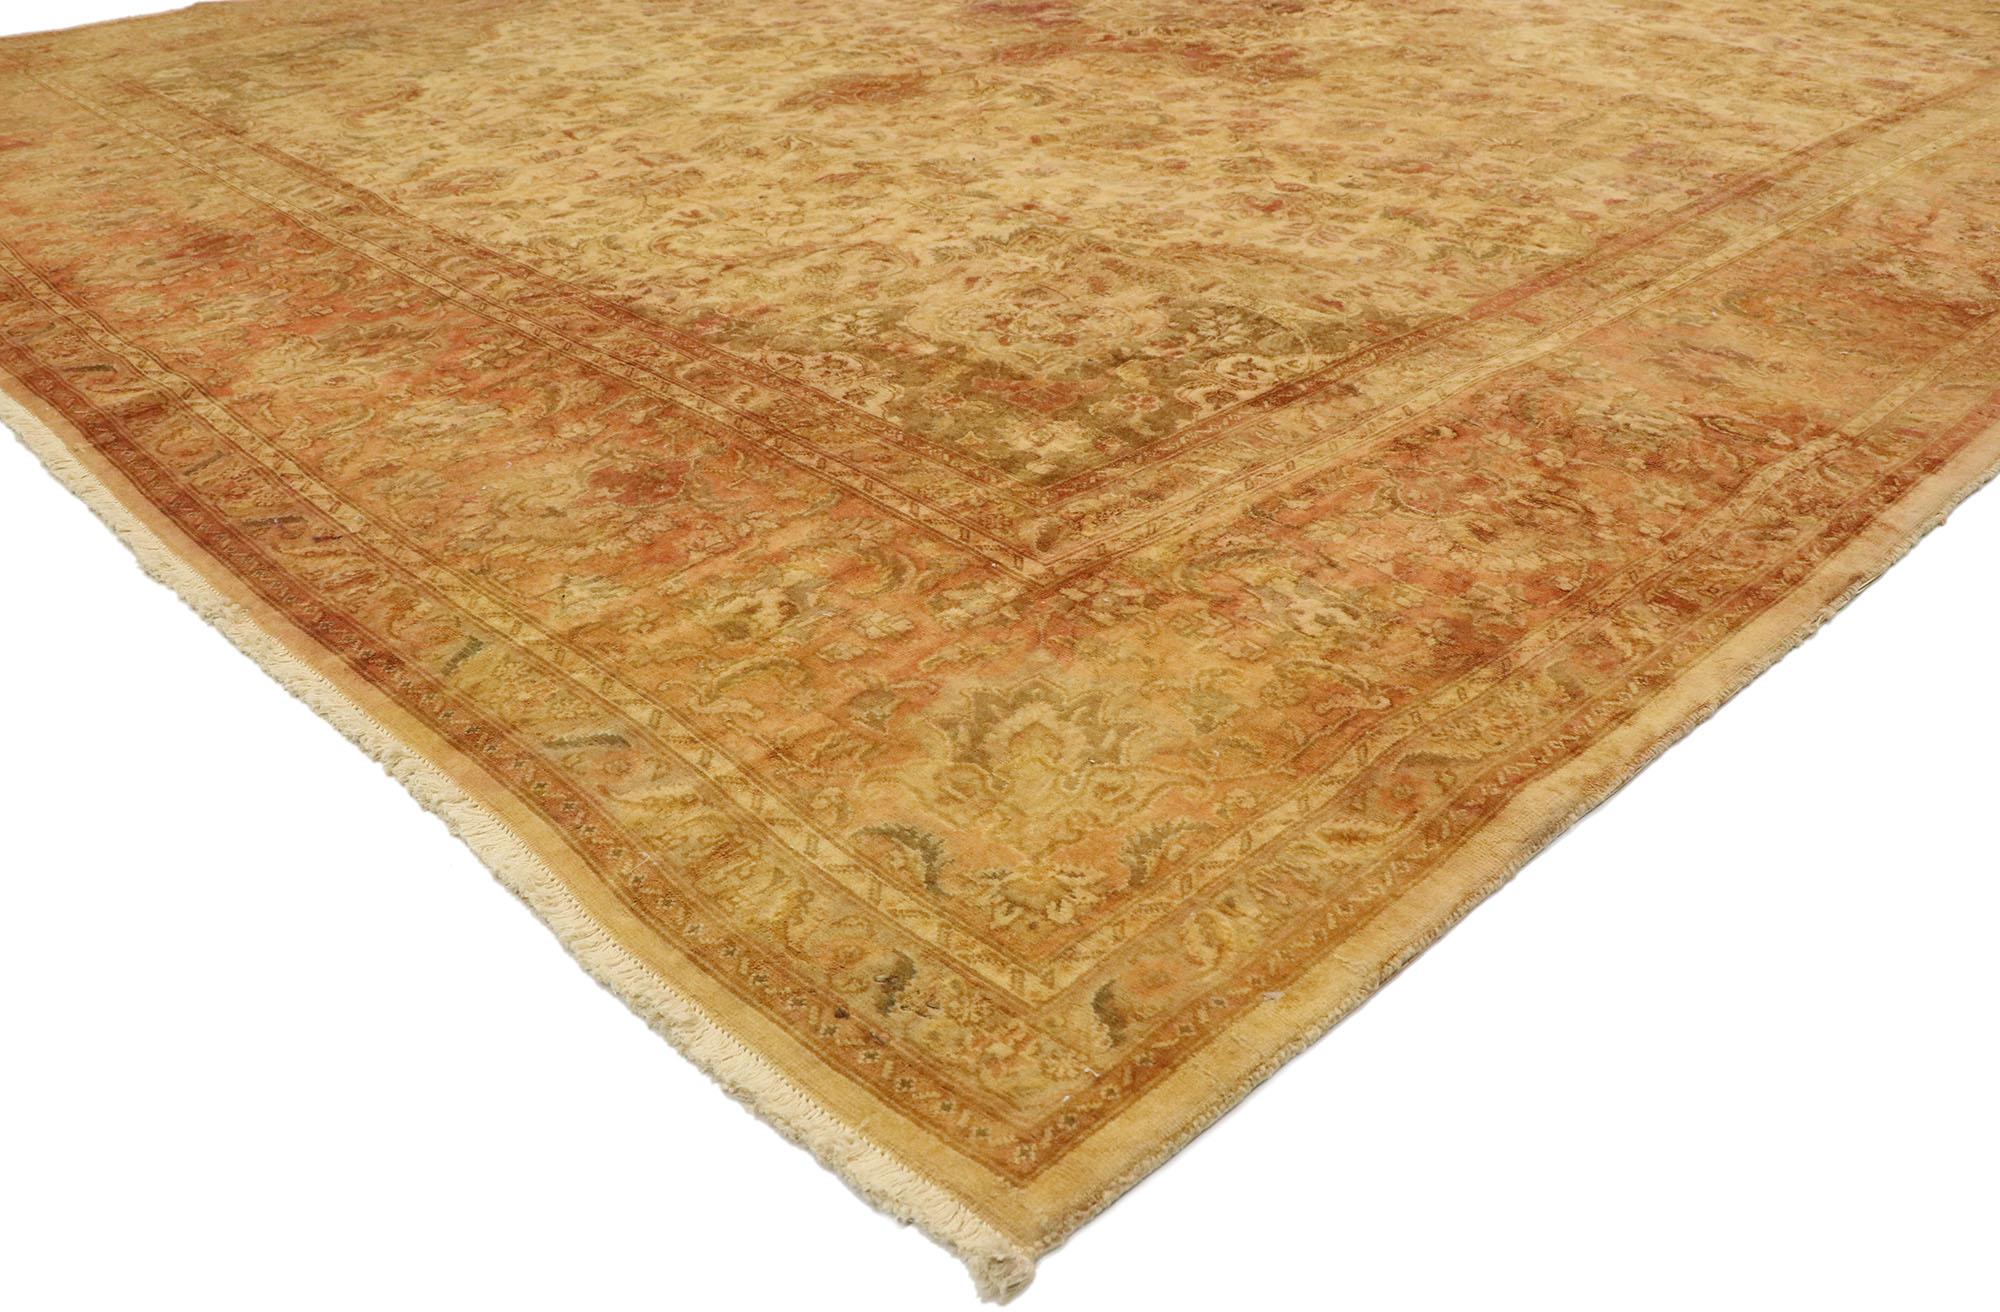 76376 Vintage Persian Tabriz Rug, 09'08 x 12'07. Radiating timeless elegance and a comforting array of earthy hues, this hand-knotted wool vintage Persian Tabriz rug exudes the rustic charm of an Italian Tuscan villa. The abrashed field, reminiscent